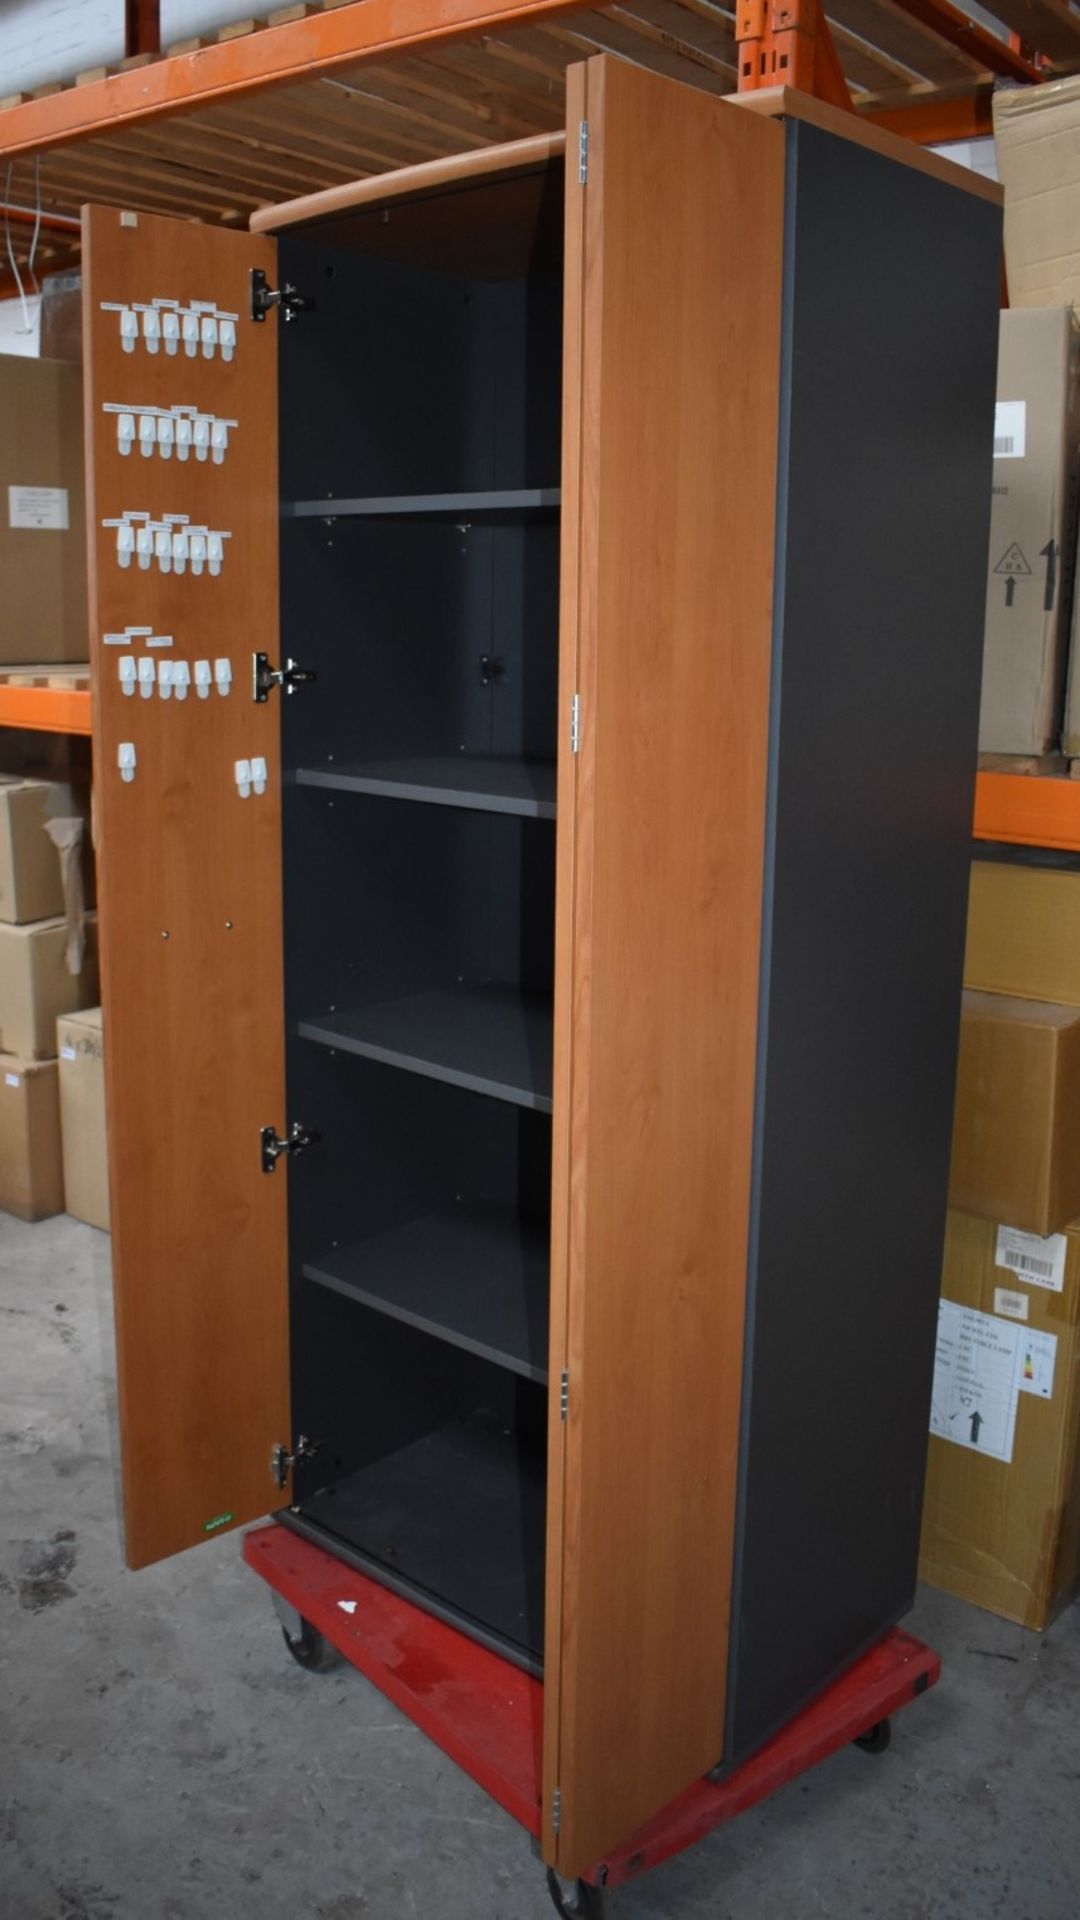 1 x Upright Office Storage Cabinet With Folding Cherry Wood Doors - H183 x W80 cms - CL011 - Ref - Image 3 of 3